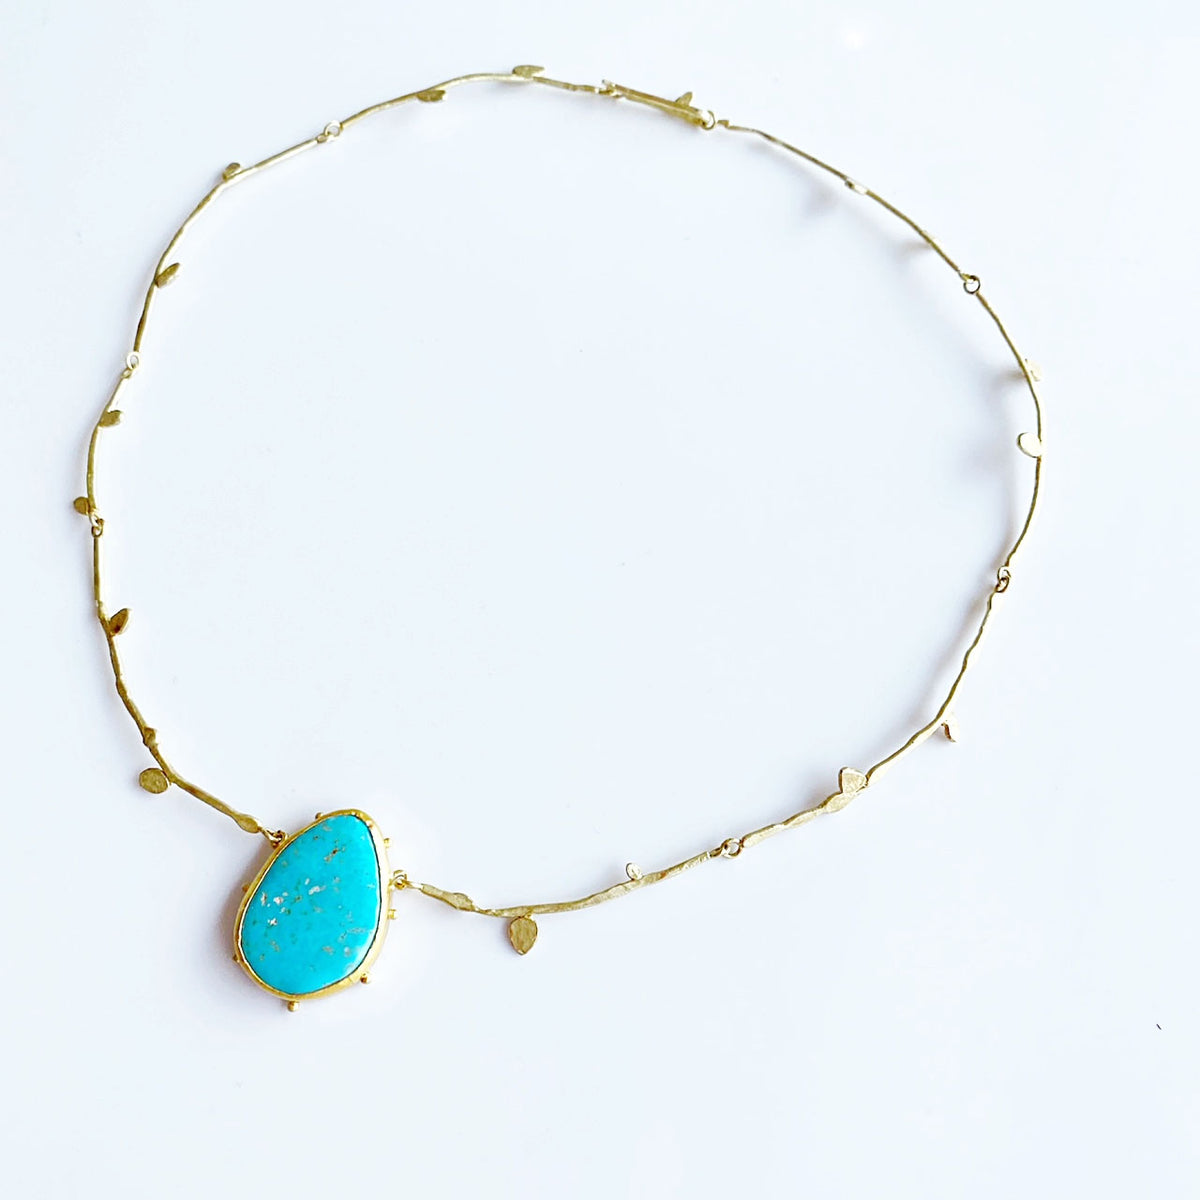 Turquoise vine necklace – jessicaweissjewelry